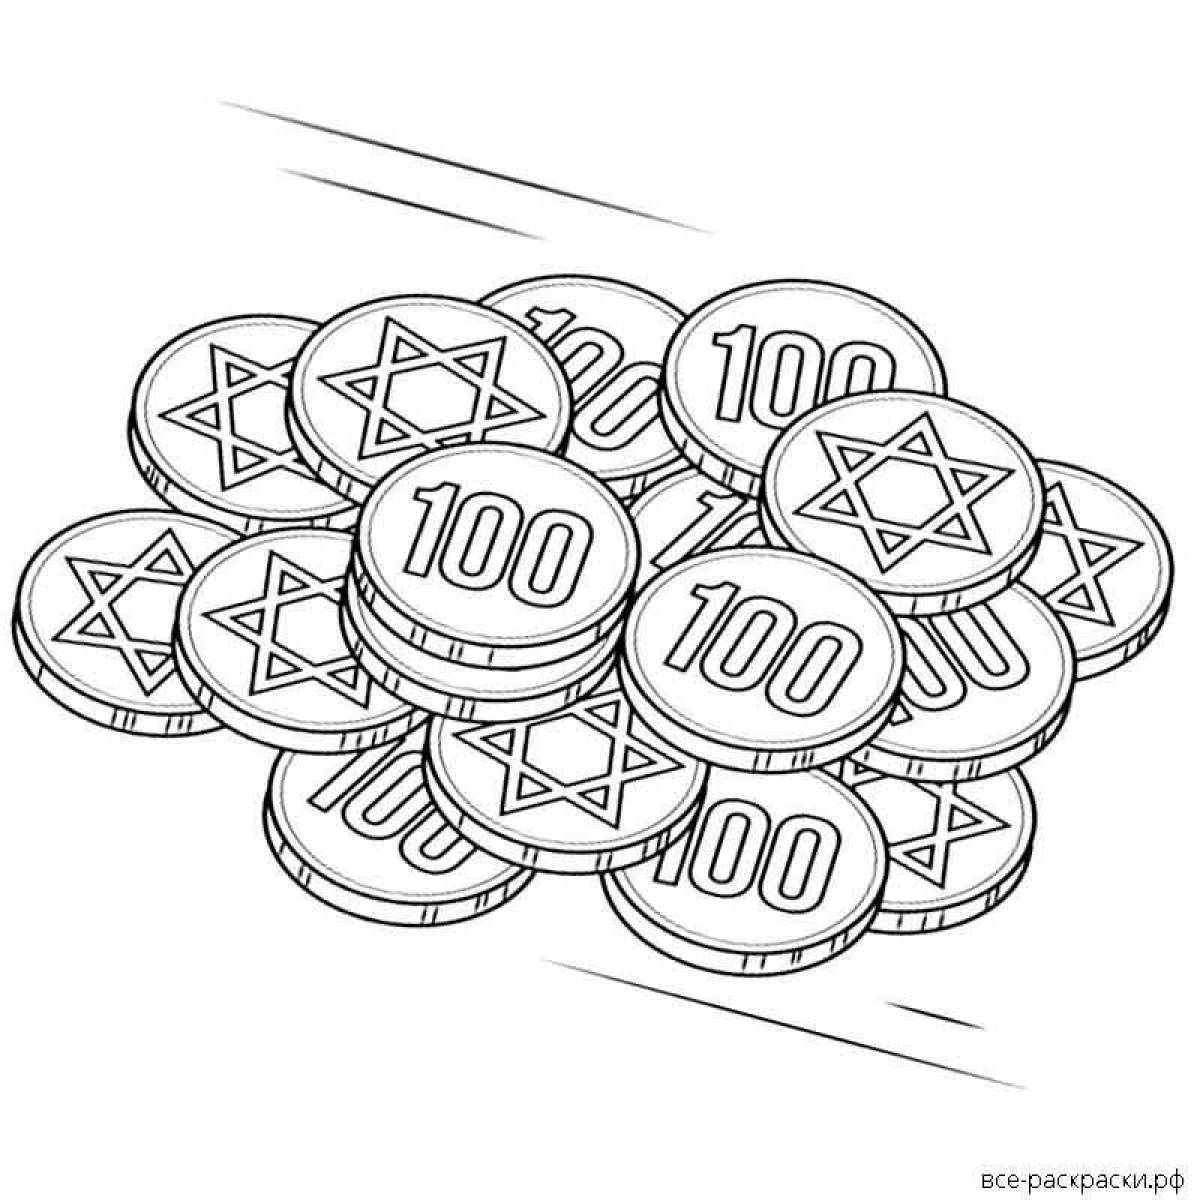 Colorful money coloring page for little innovators